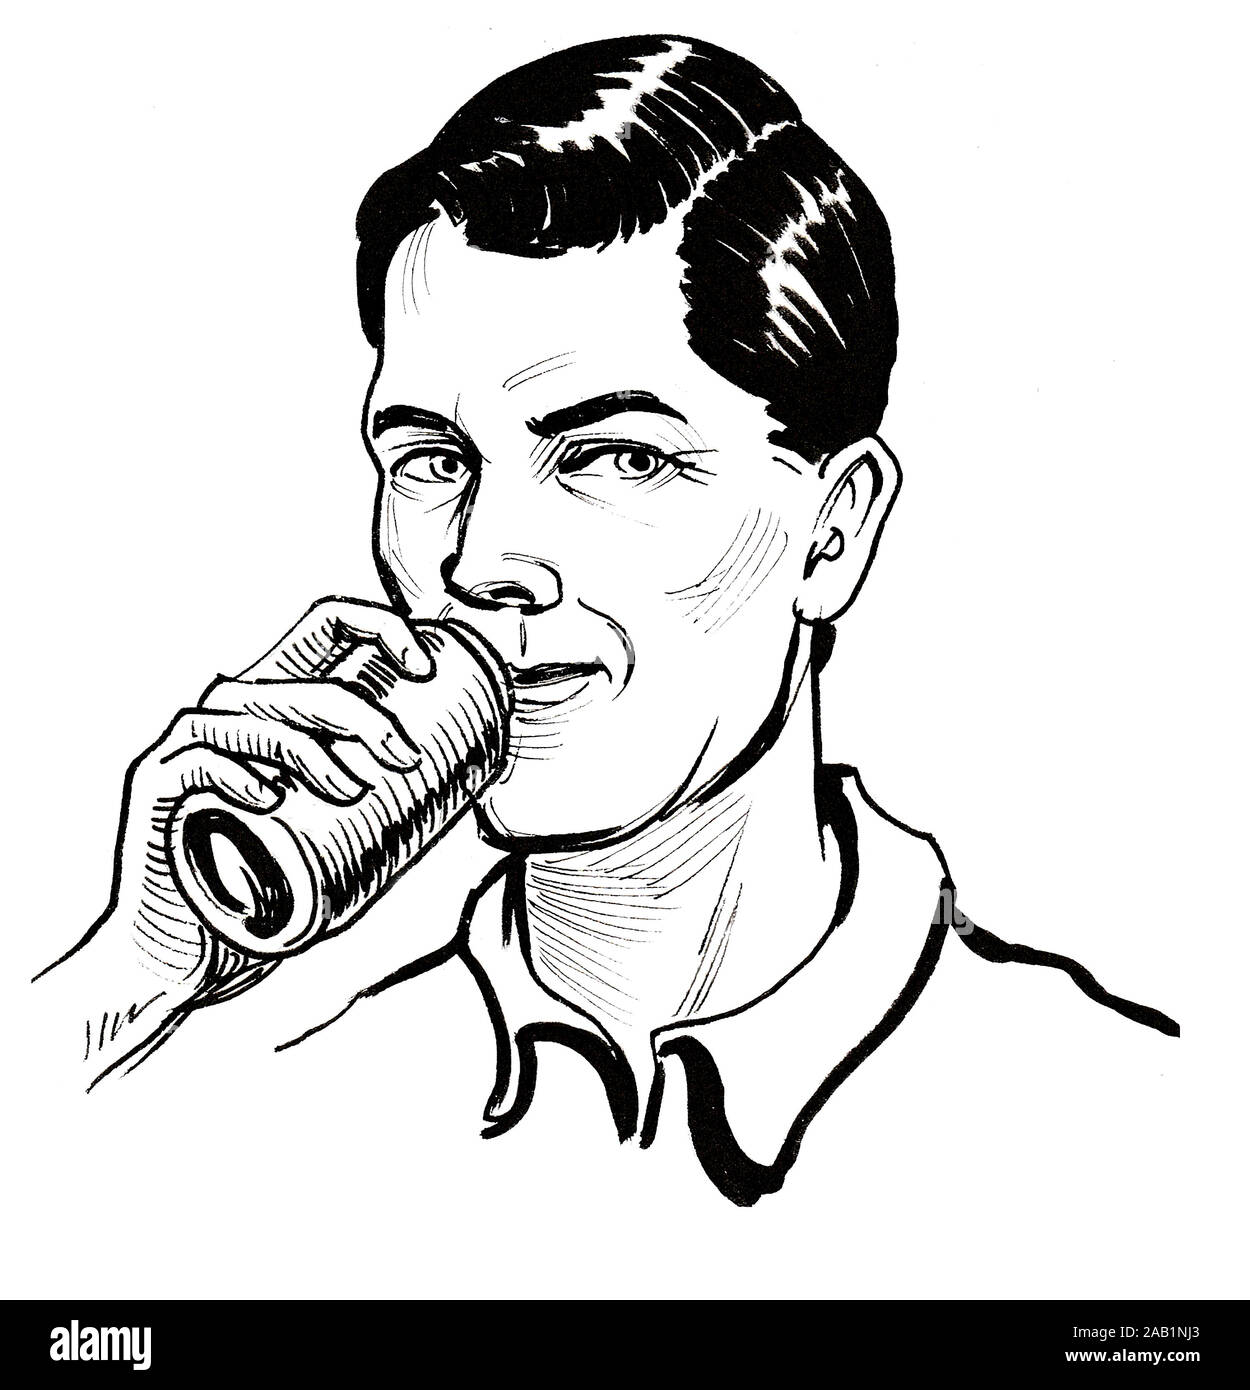 Man drinking from the can. Ink black and white drawing Stock Photo